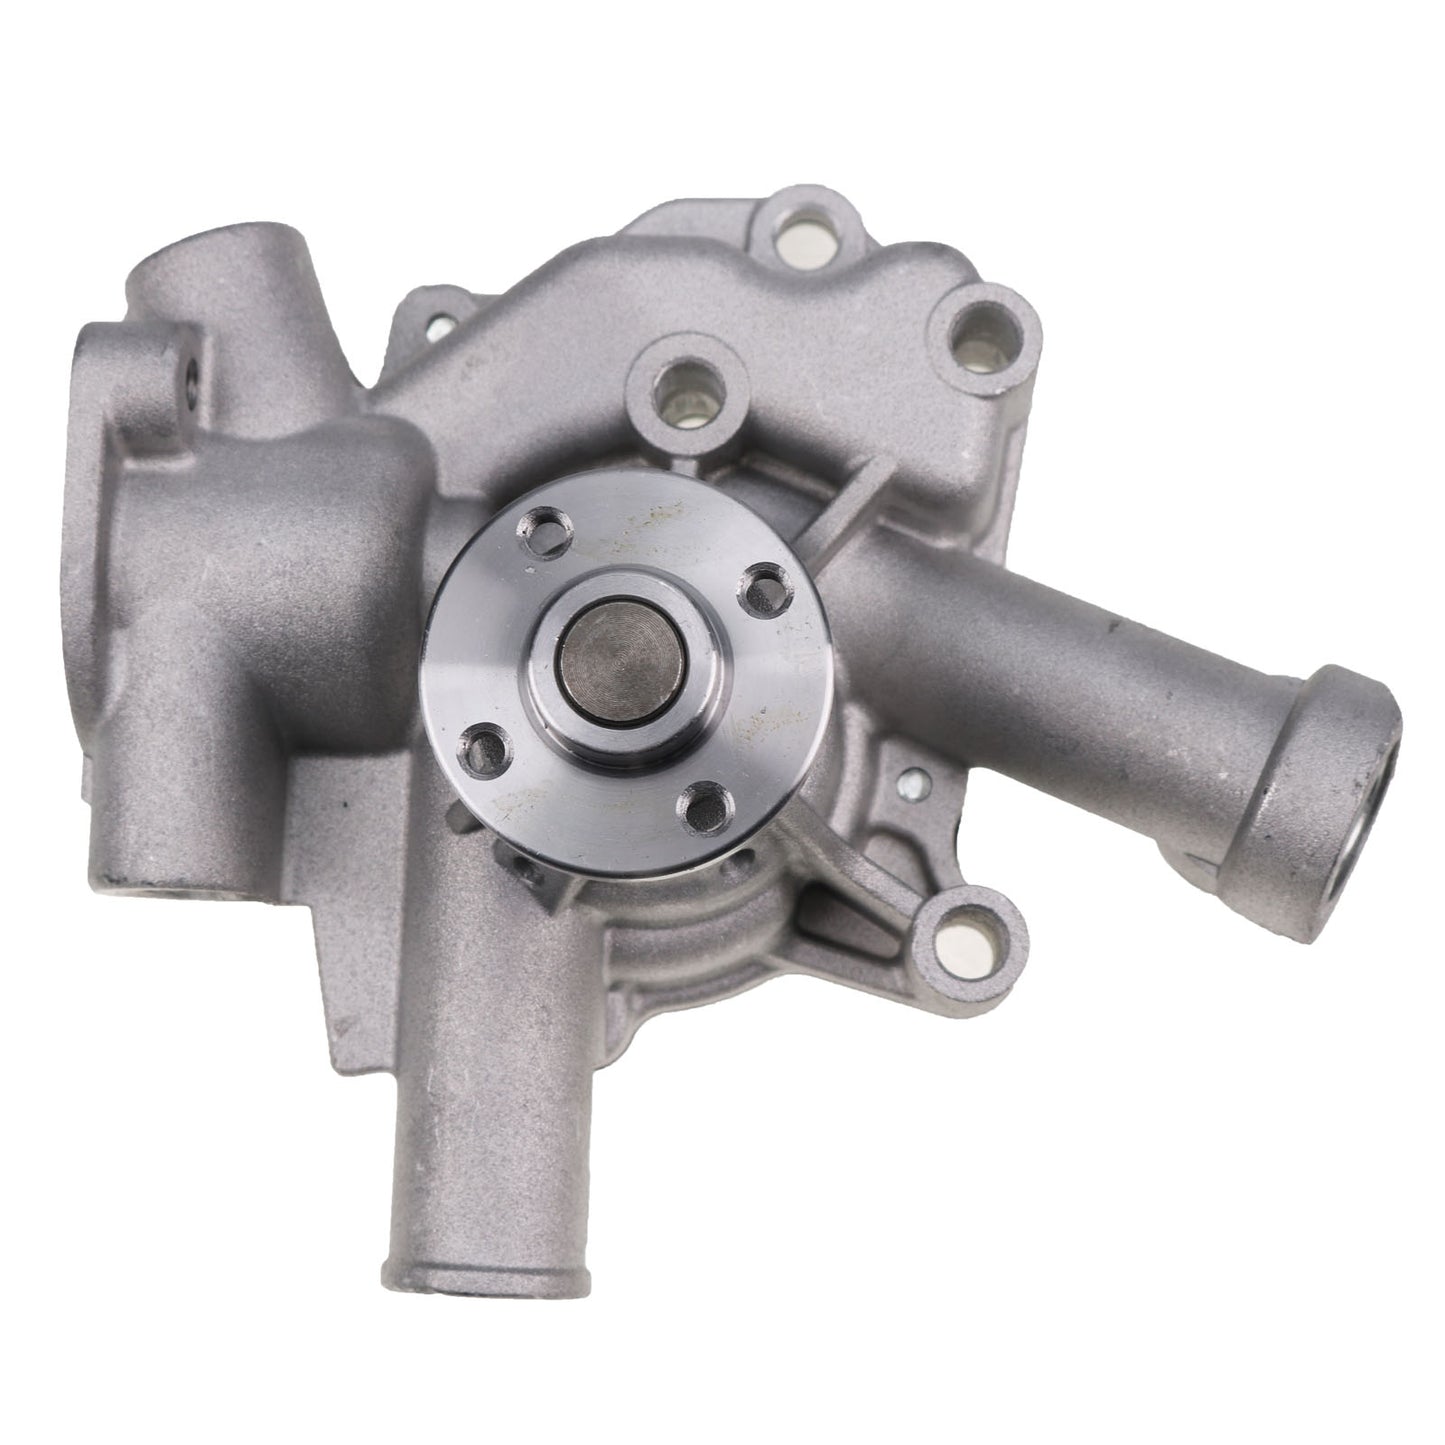 New AM881433 Water Pump Compatible with John Deere F925 F932 F935 2210 4100 4110 455 670